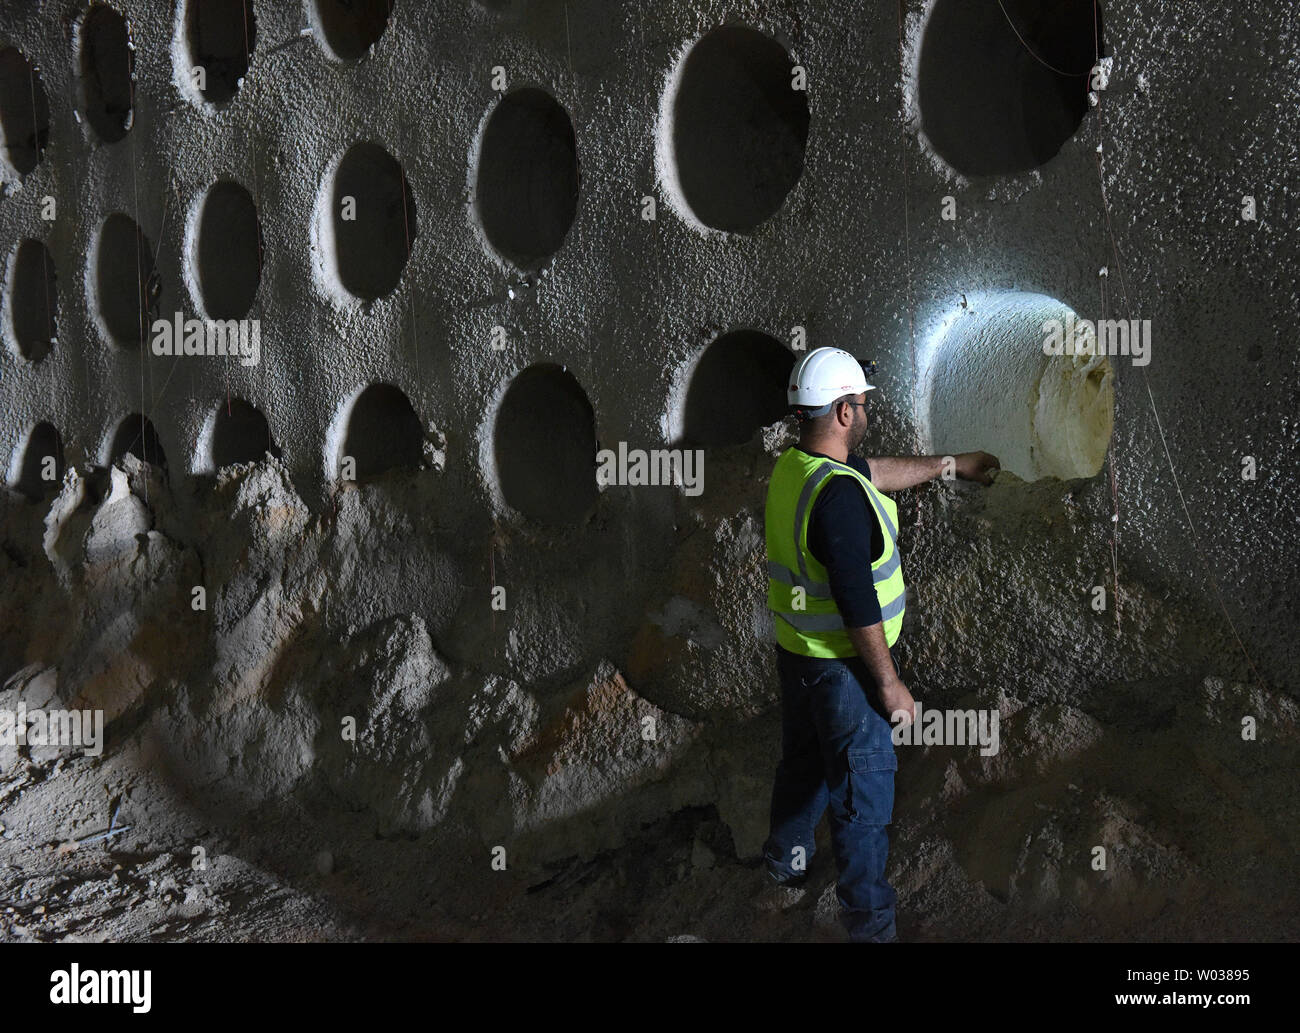 Itzik Behar, project engineer, looks at a partially constructed catacomb burial plot in the underground burial tunnels at the Givat Shaul Cemetery, Har HaMenuchot, in Jerusalem, Israel, on November 26, 2017.  Due to overcrowding and lack of land for burial sites in Jerusalem, the religious burial society called Chevra Kadisha, is building the massive underground burial site that will provide space for more than 22,000 graves. Photo by Debbie Hill/UPI Stock Photo